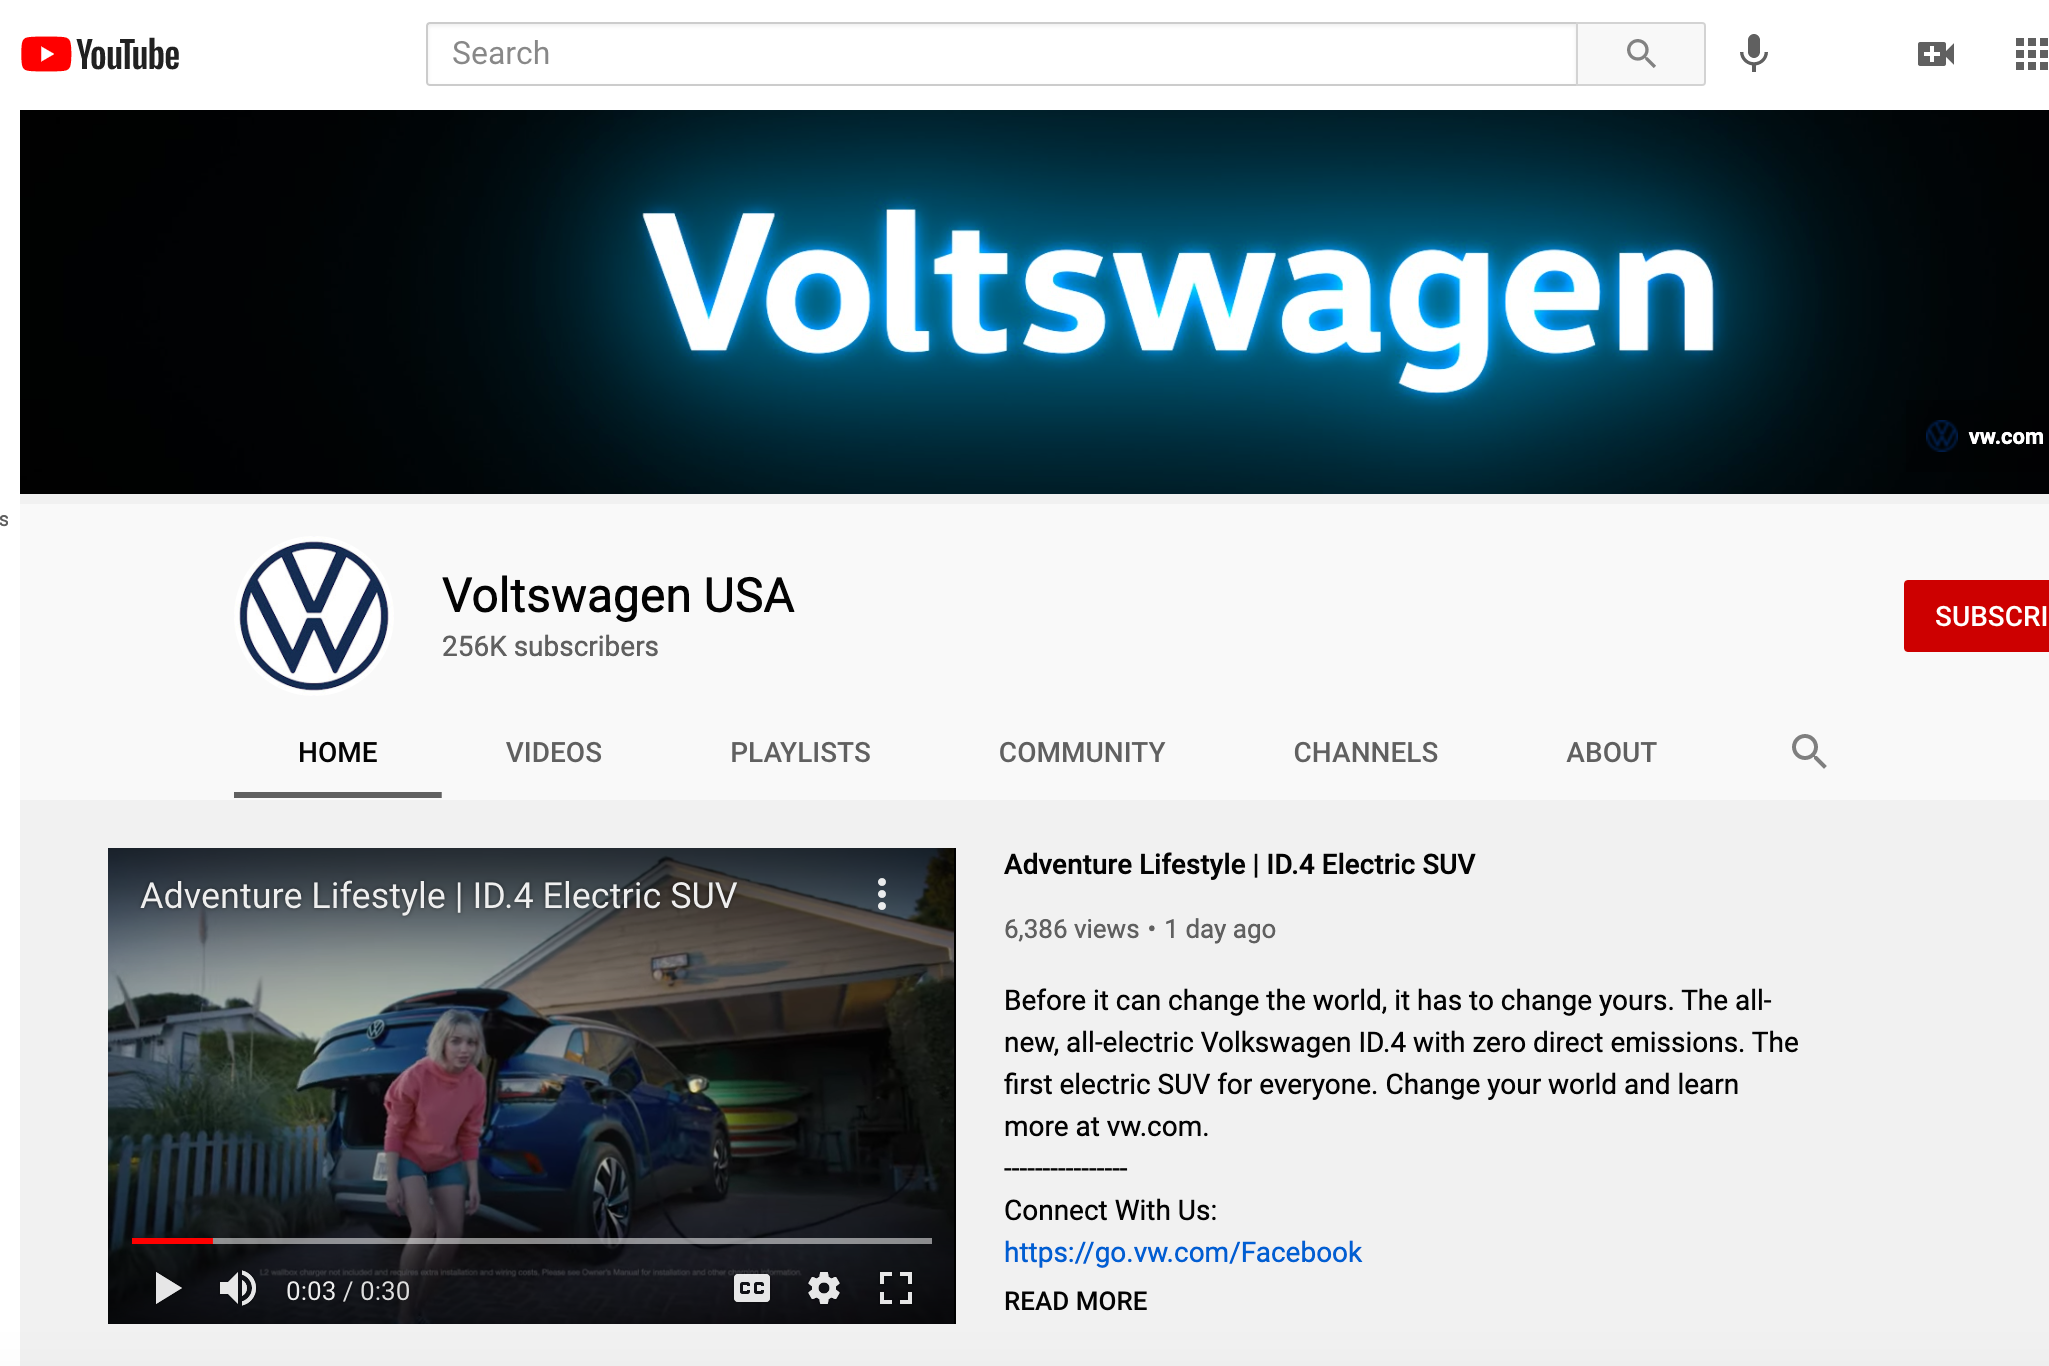 The Voltswagen Youtube page